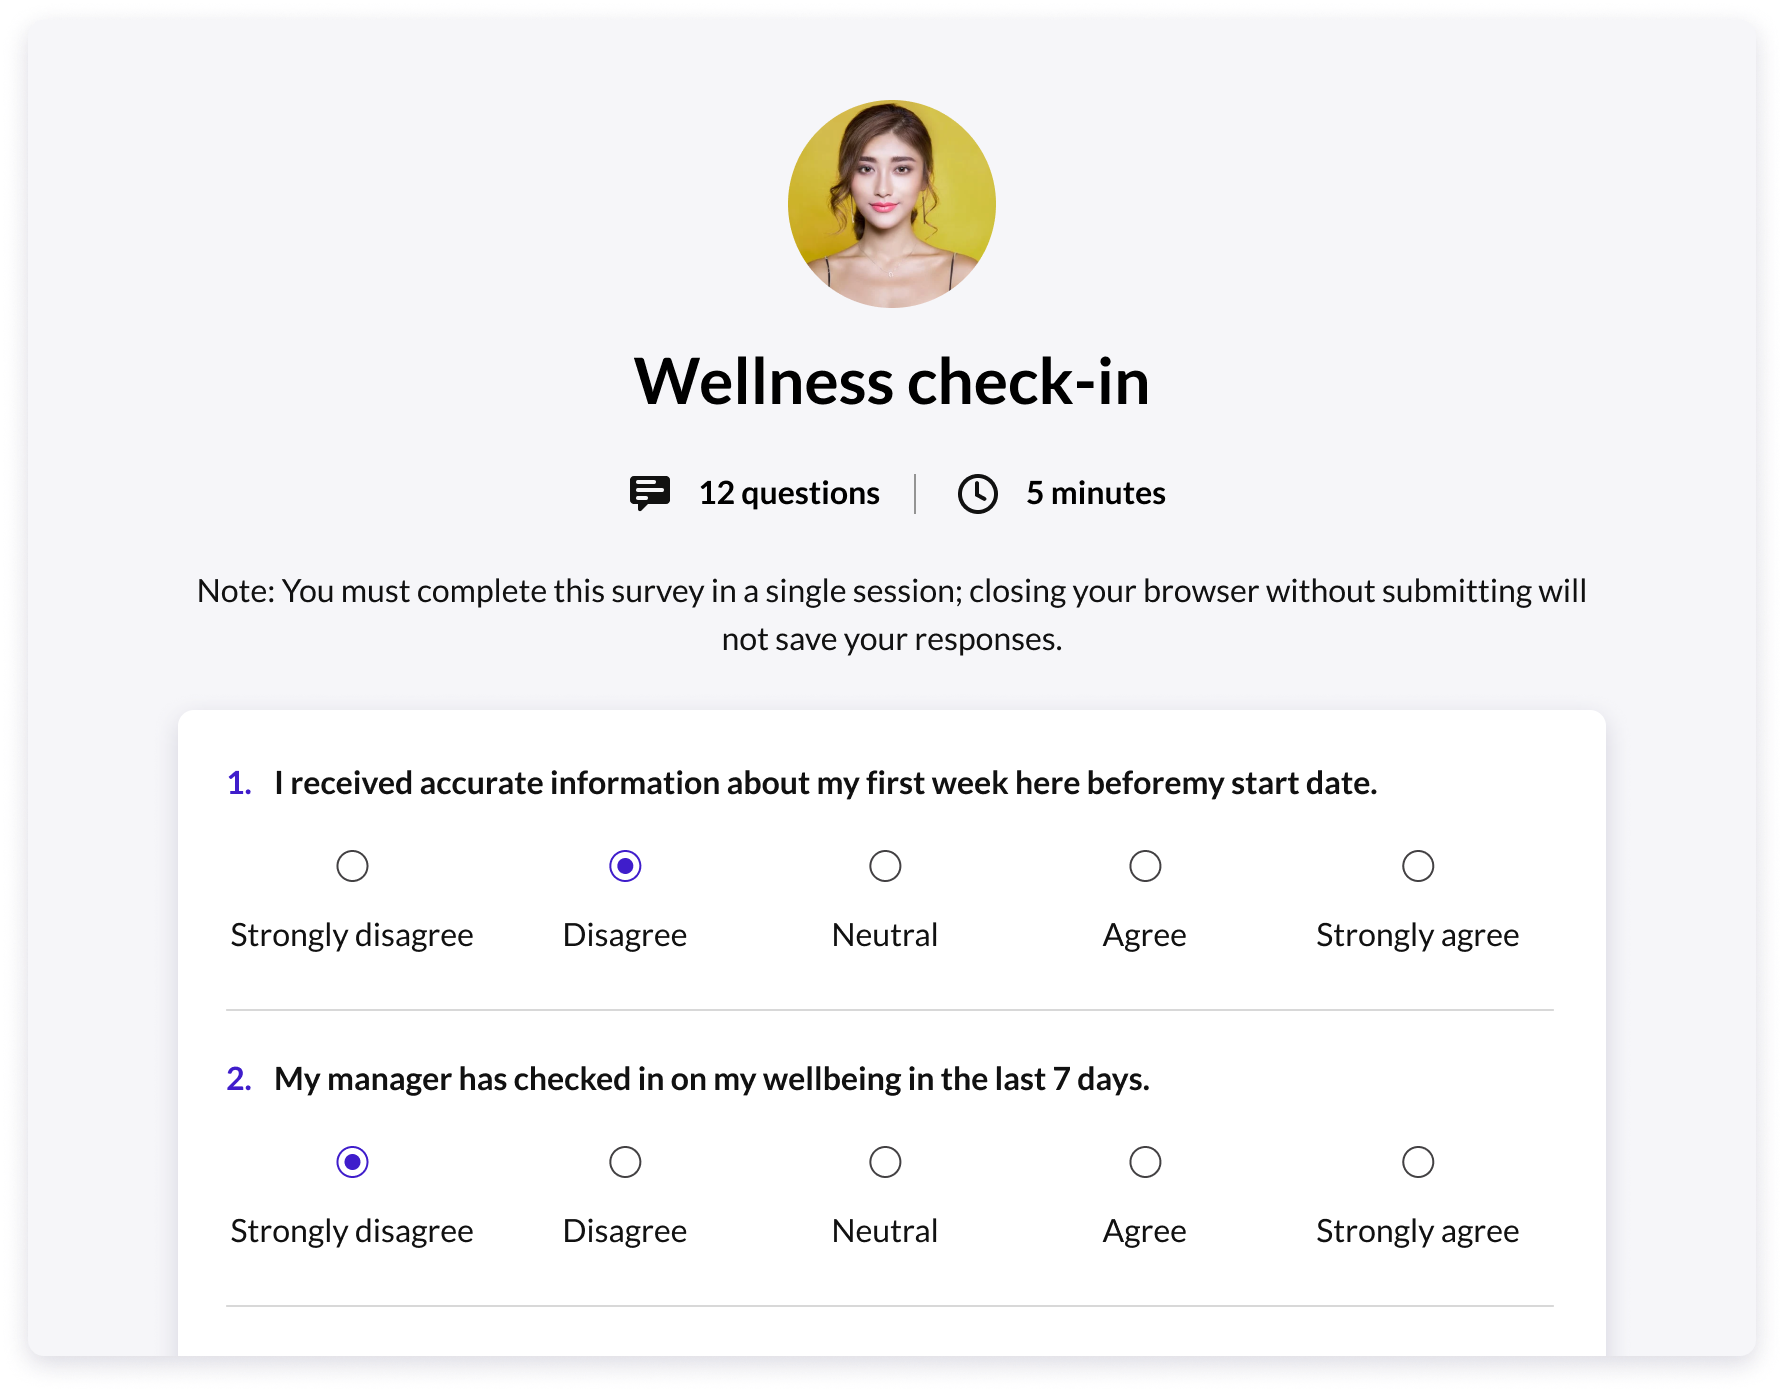 Wellness_check-in_survey_example.png